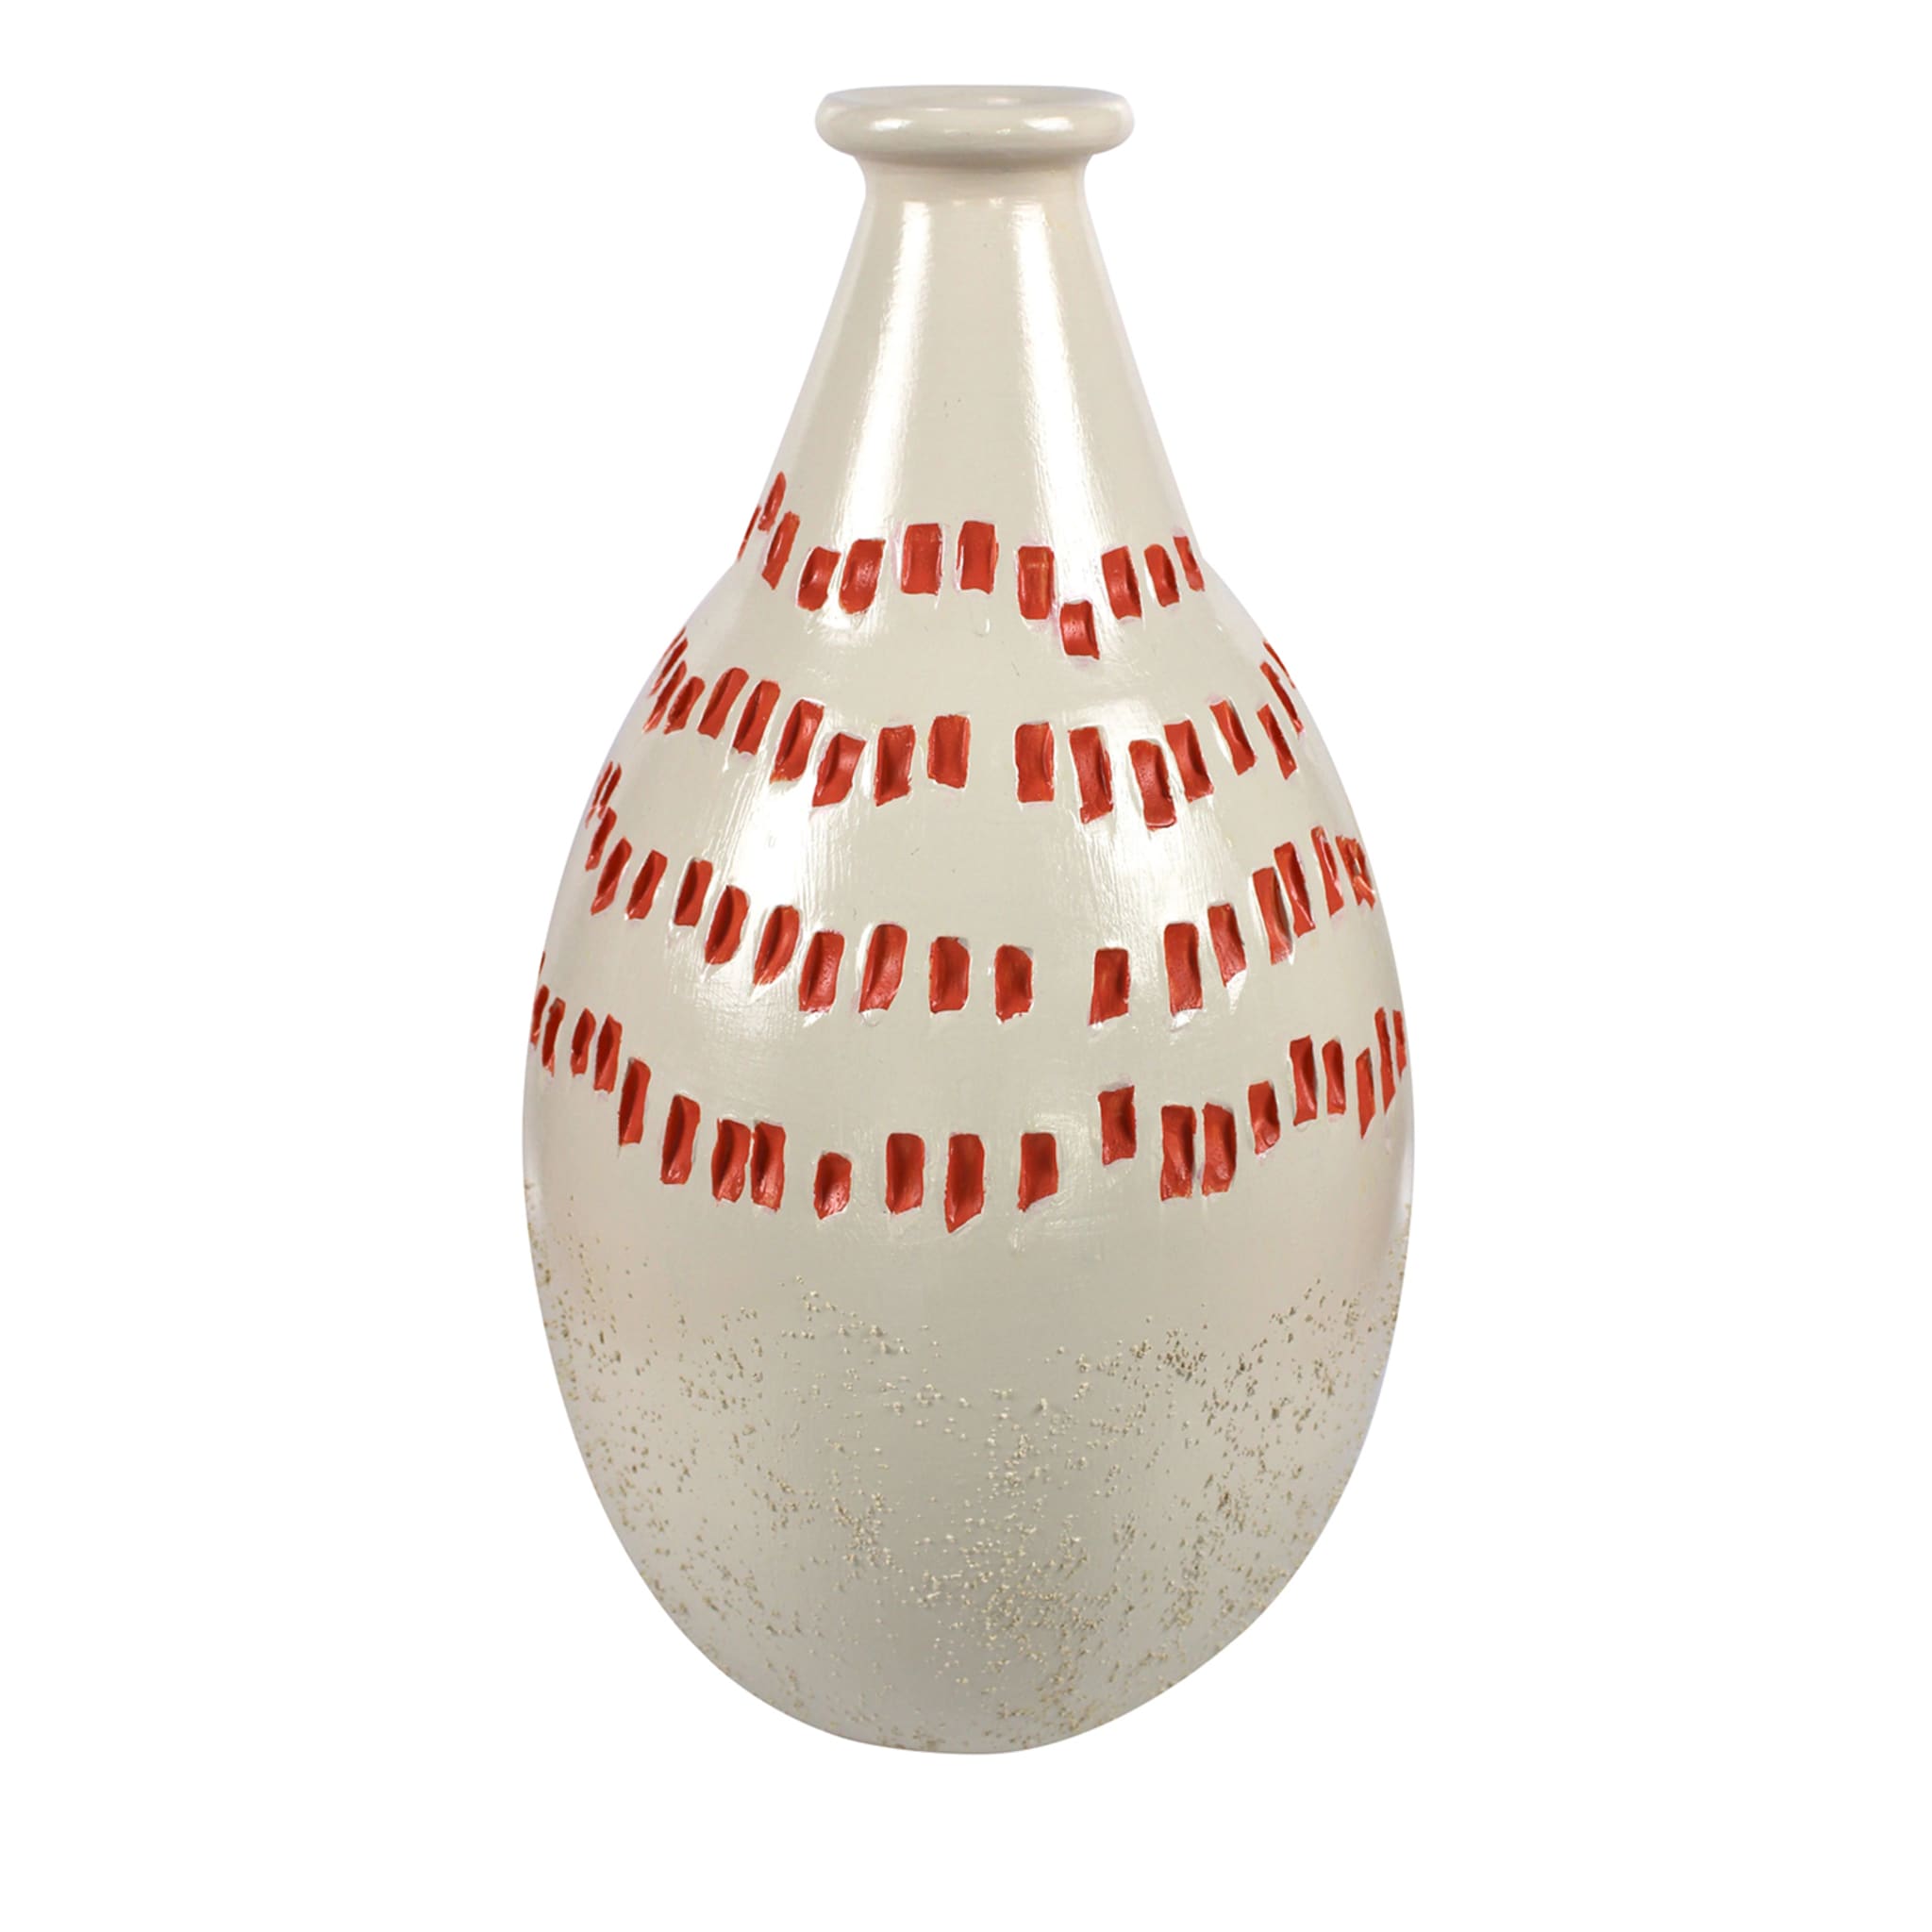 Drop-Shaped Beige & Red Vase 17 by Mascia Meccani - Main view